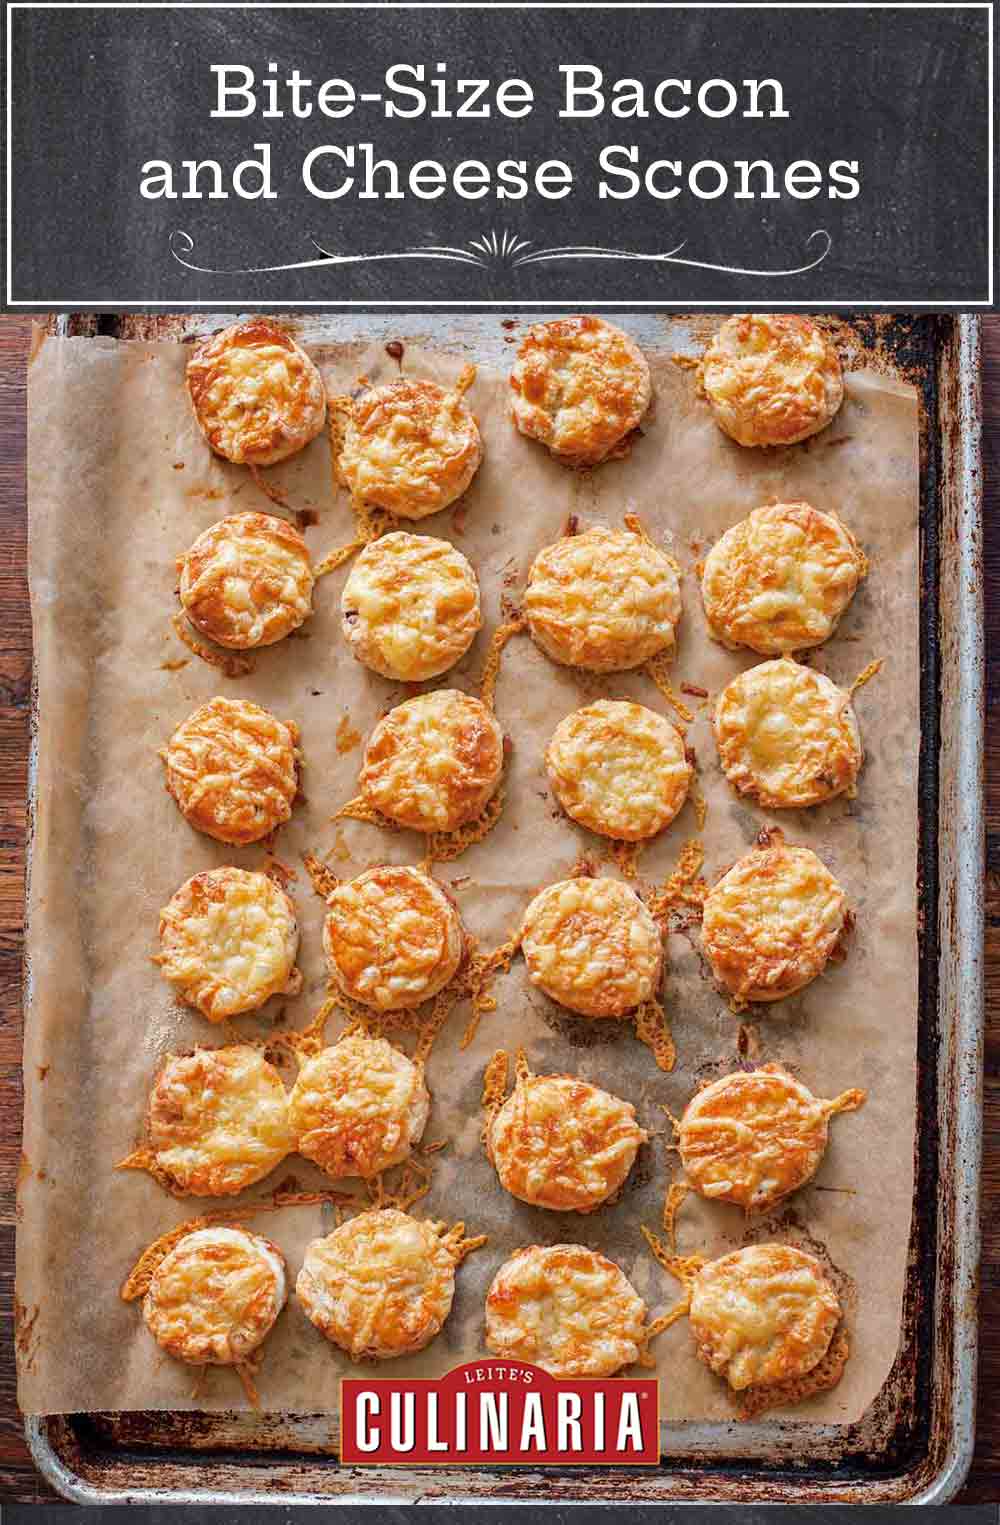 Bite-size bacon and cheese scones with smoked bacon and melted Asiago on top on a parchment-lined baking sheet